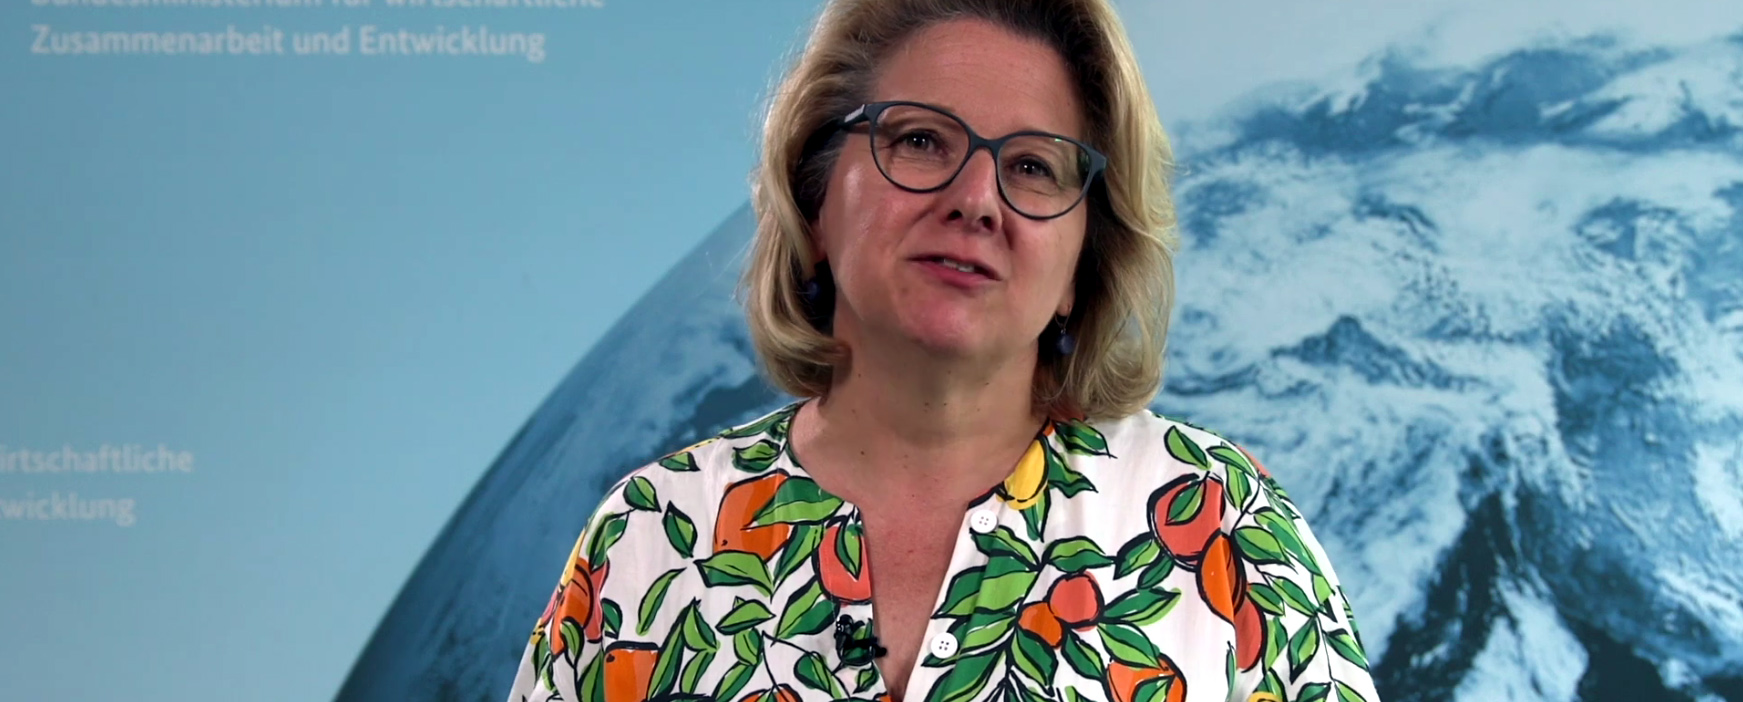 Still from the video message by German Development Minister Svenja Schulze on the occasion of her taking on the presidency of the Sahel Alliance (English with French subtitles)